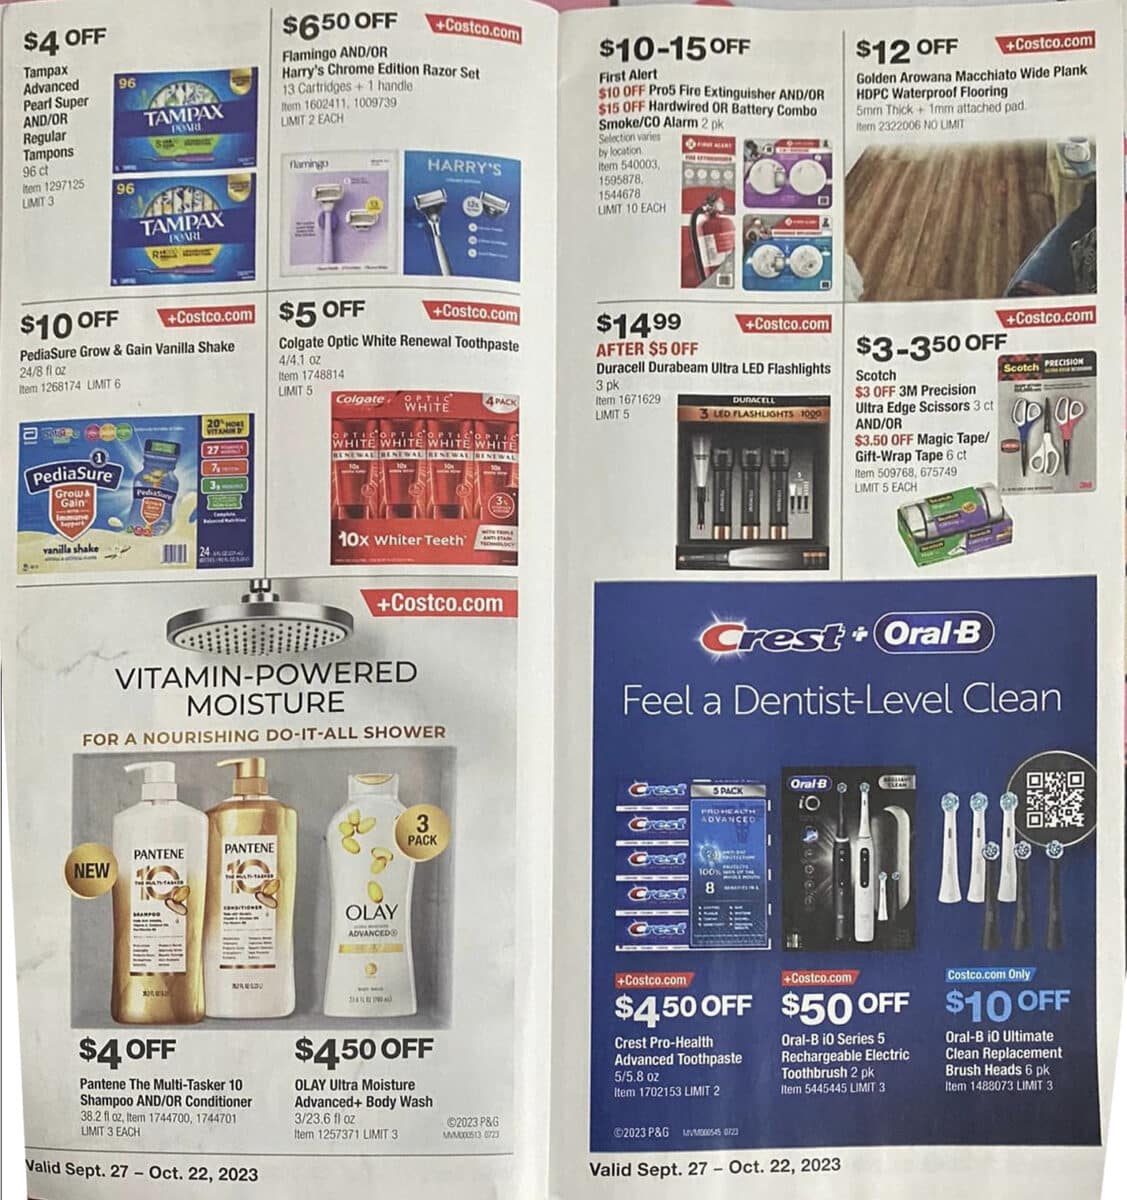 Costco Coupon Book Scan for September October 2023